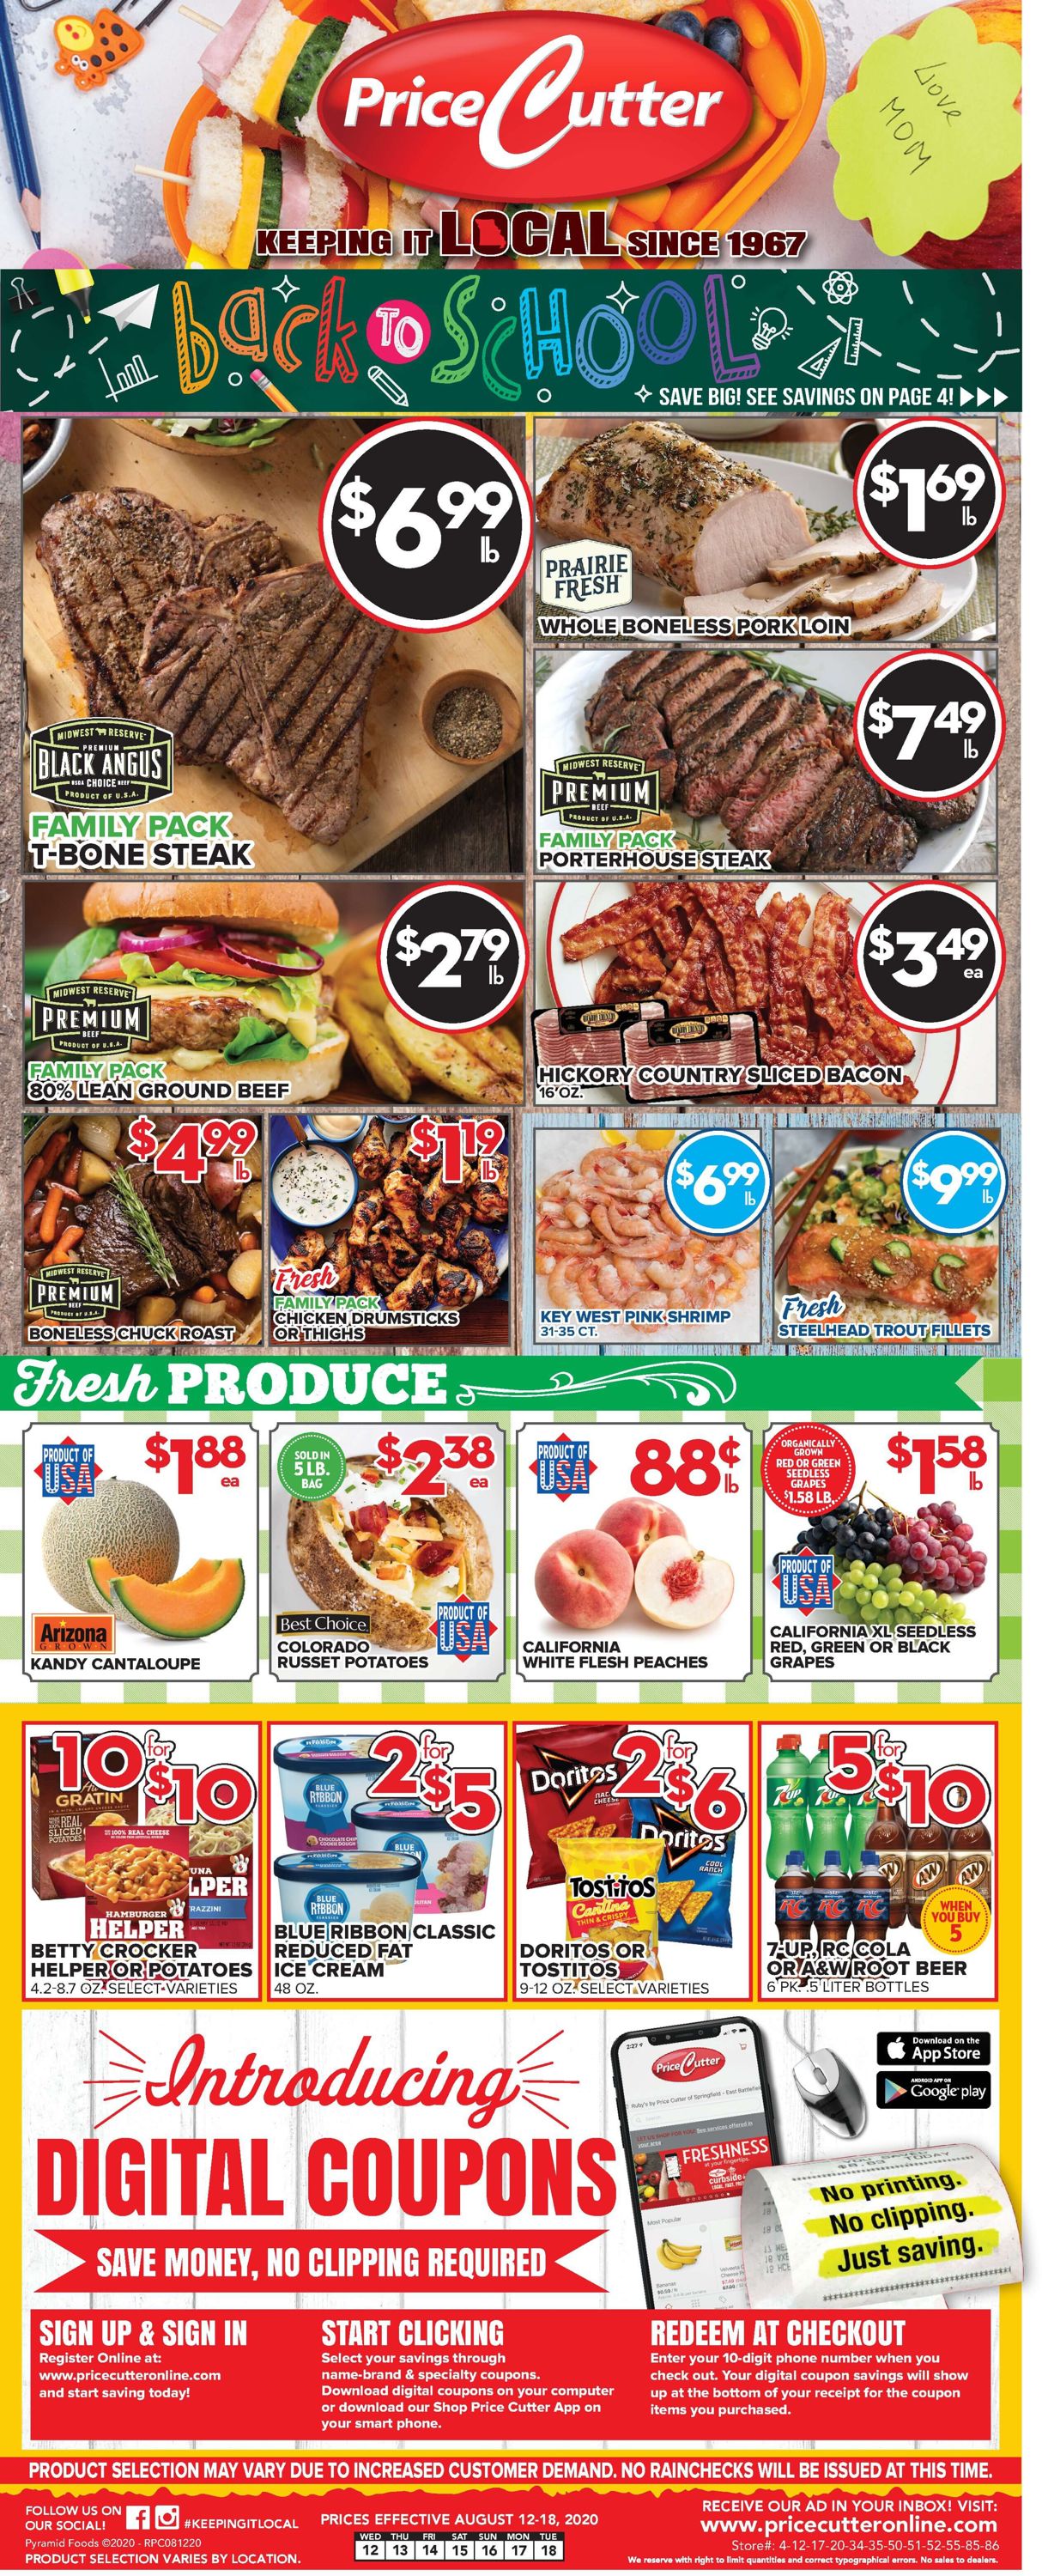 Price Cutter Weekly Ad Circular - valid 08/12-08/18/2020